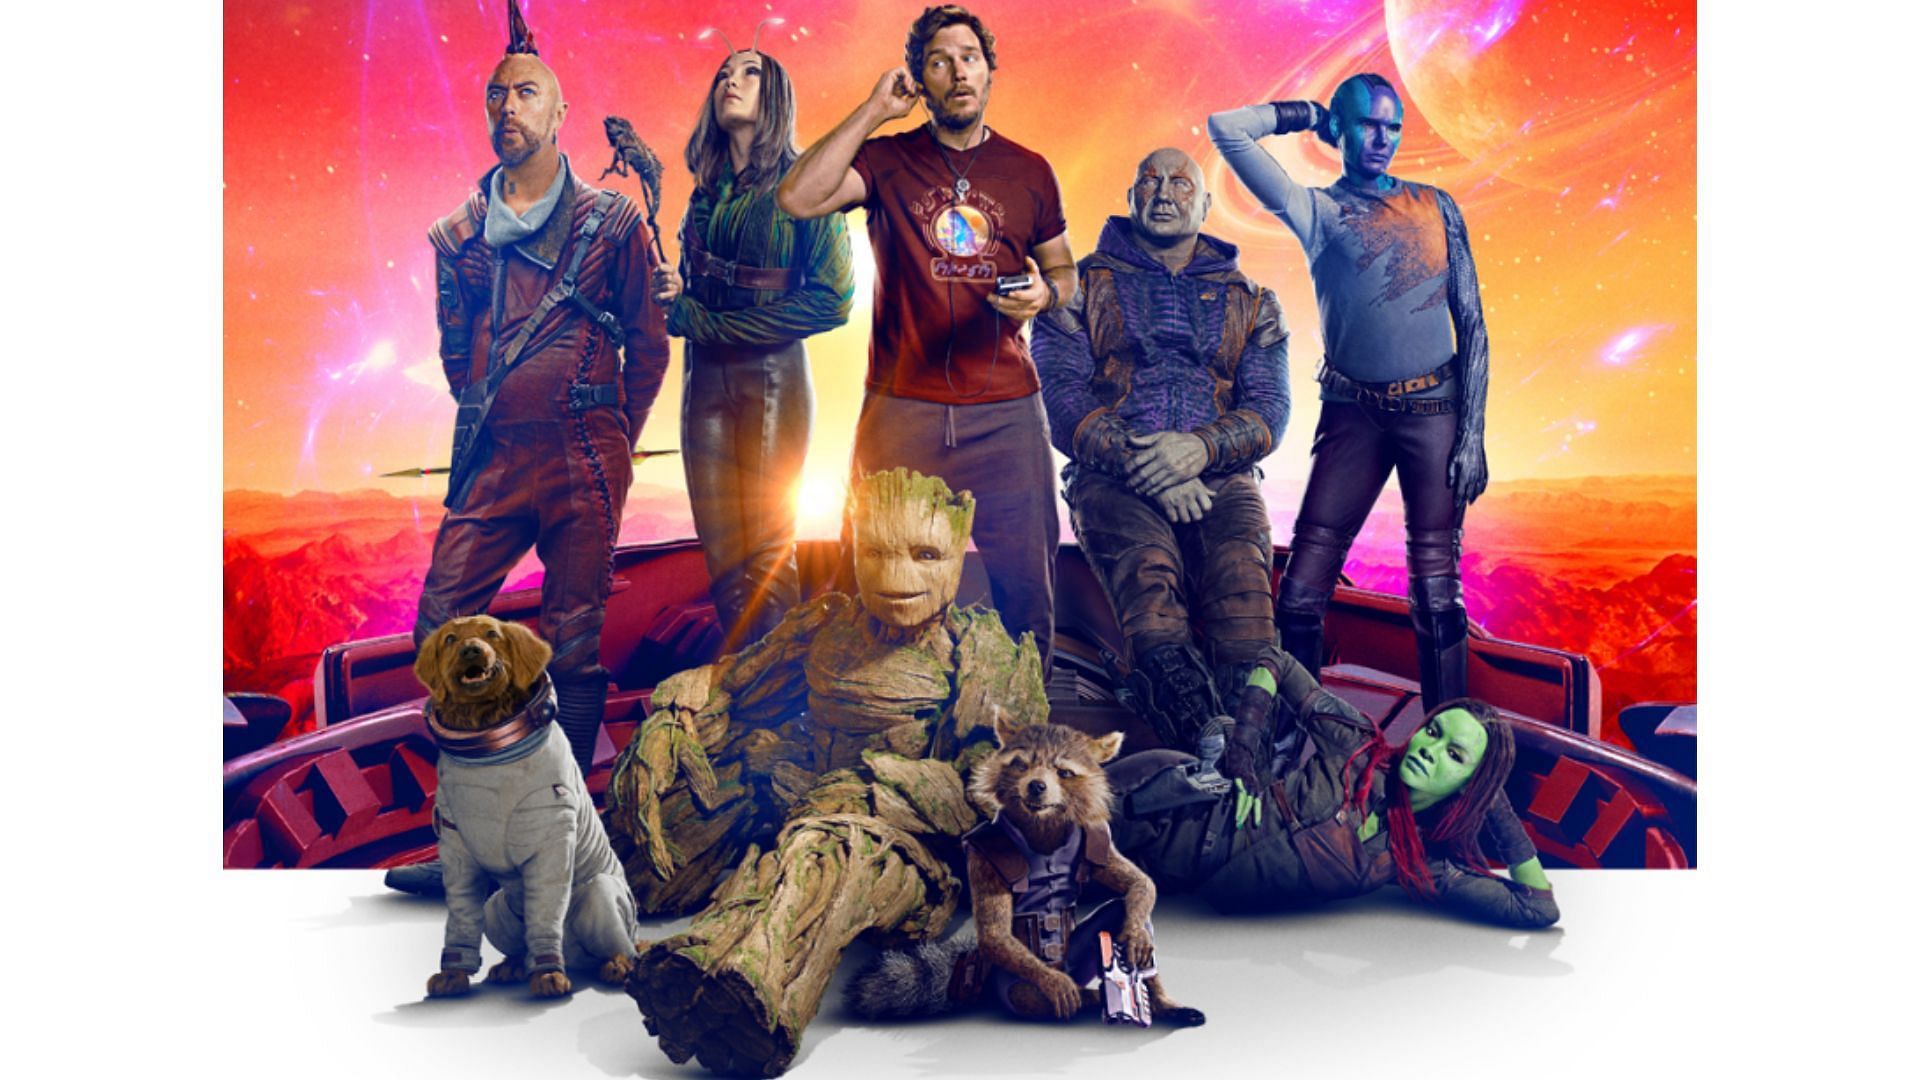 The Guardians&#039; unusual members have caught the fancy of fans (Image via Marvel)